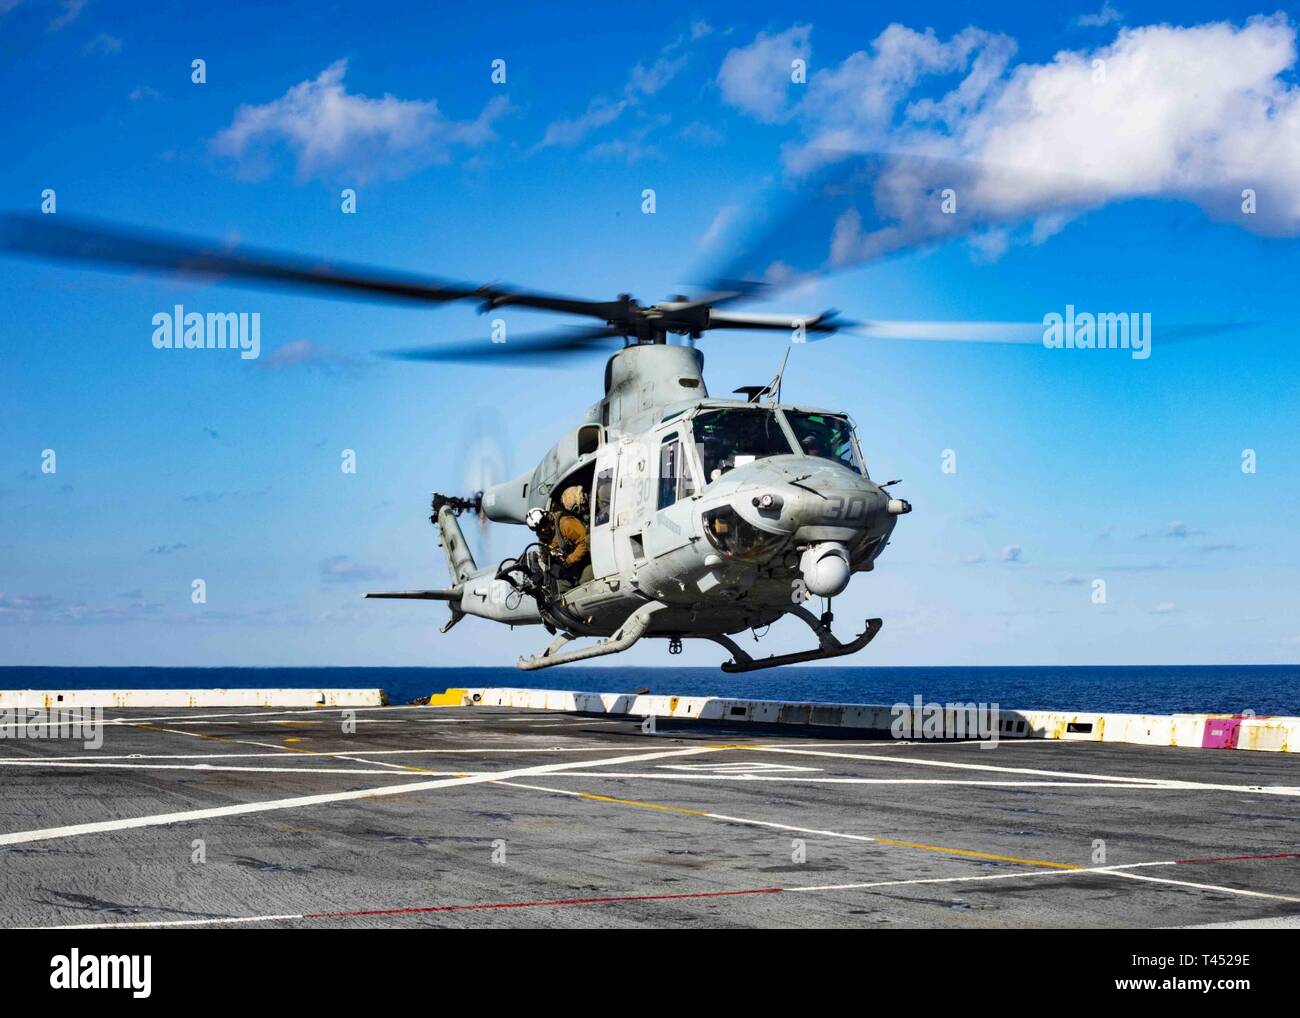 MEDITERRANEAN SEA (Feb. 26, 2019) A UH-1Y Huey helicopter assigned to the “Black Knights” of Marine Medium Tiltrotor Squadron (VMM) 264 (Reinforced) lands on the flight deck of the San Antonio-class amphibious transport dock ship USS Arlington (LPD 24), Feb. 26, 2019. Arlington is on a scheduled deployment as part of the Kearsarge Amphibious Ready Group in support of maritime security operations, crisis response and theater security cooperation, while also providing a forward naval presence. Stock Photo